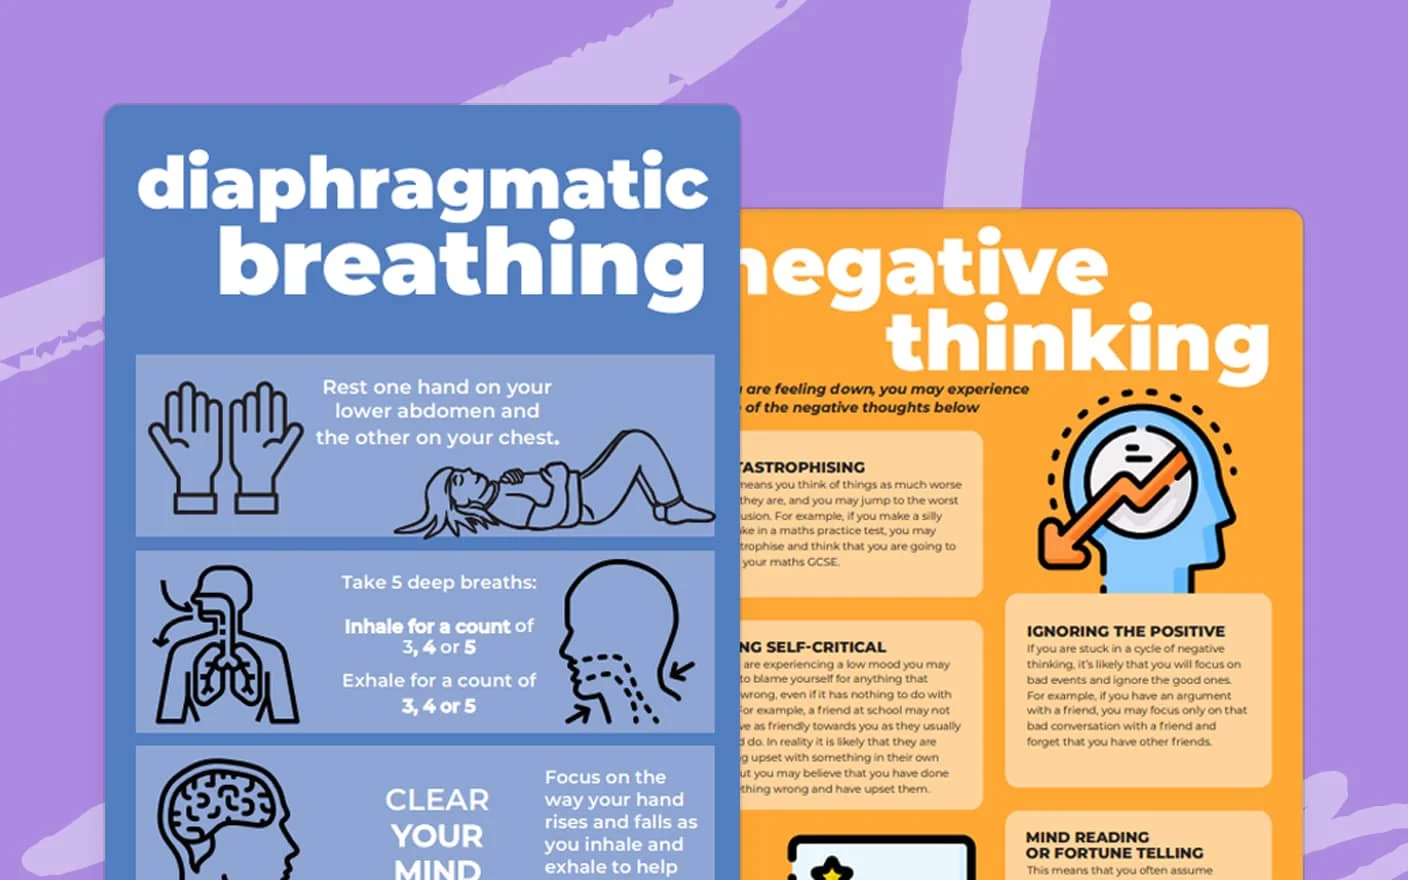 Educational graphic showing techniques for diaphragmatic breathing and identifying negative thinking patterns, aimed at providing expert-developed materials for mental health and personal development.